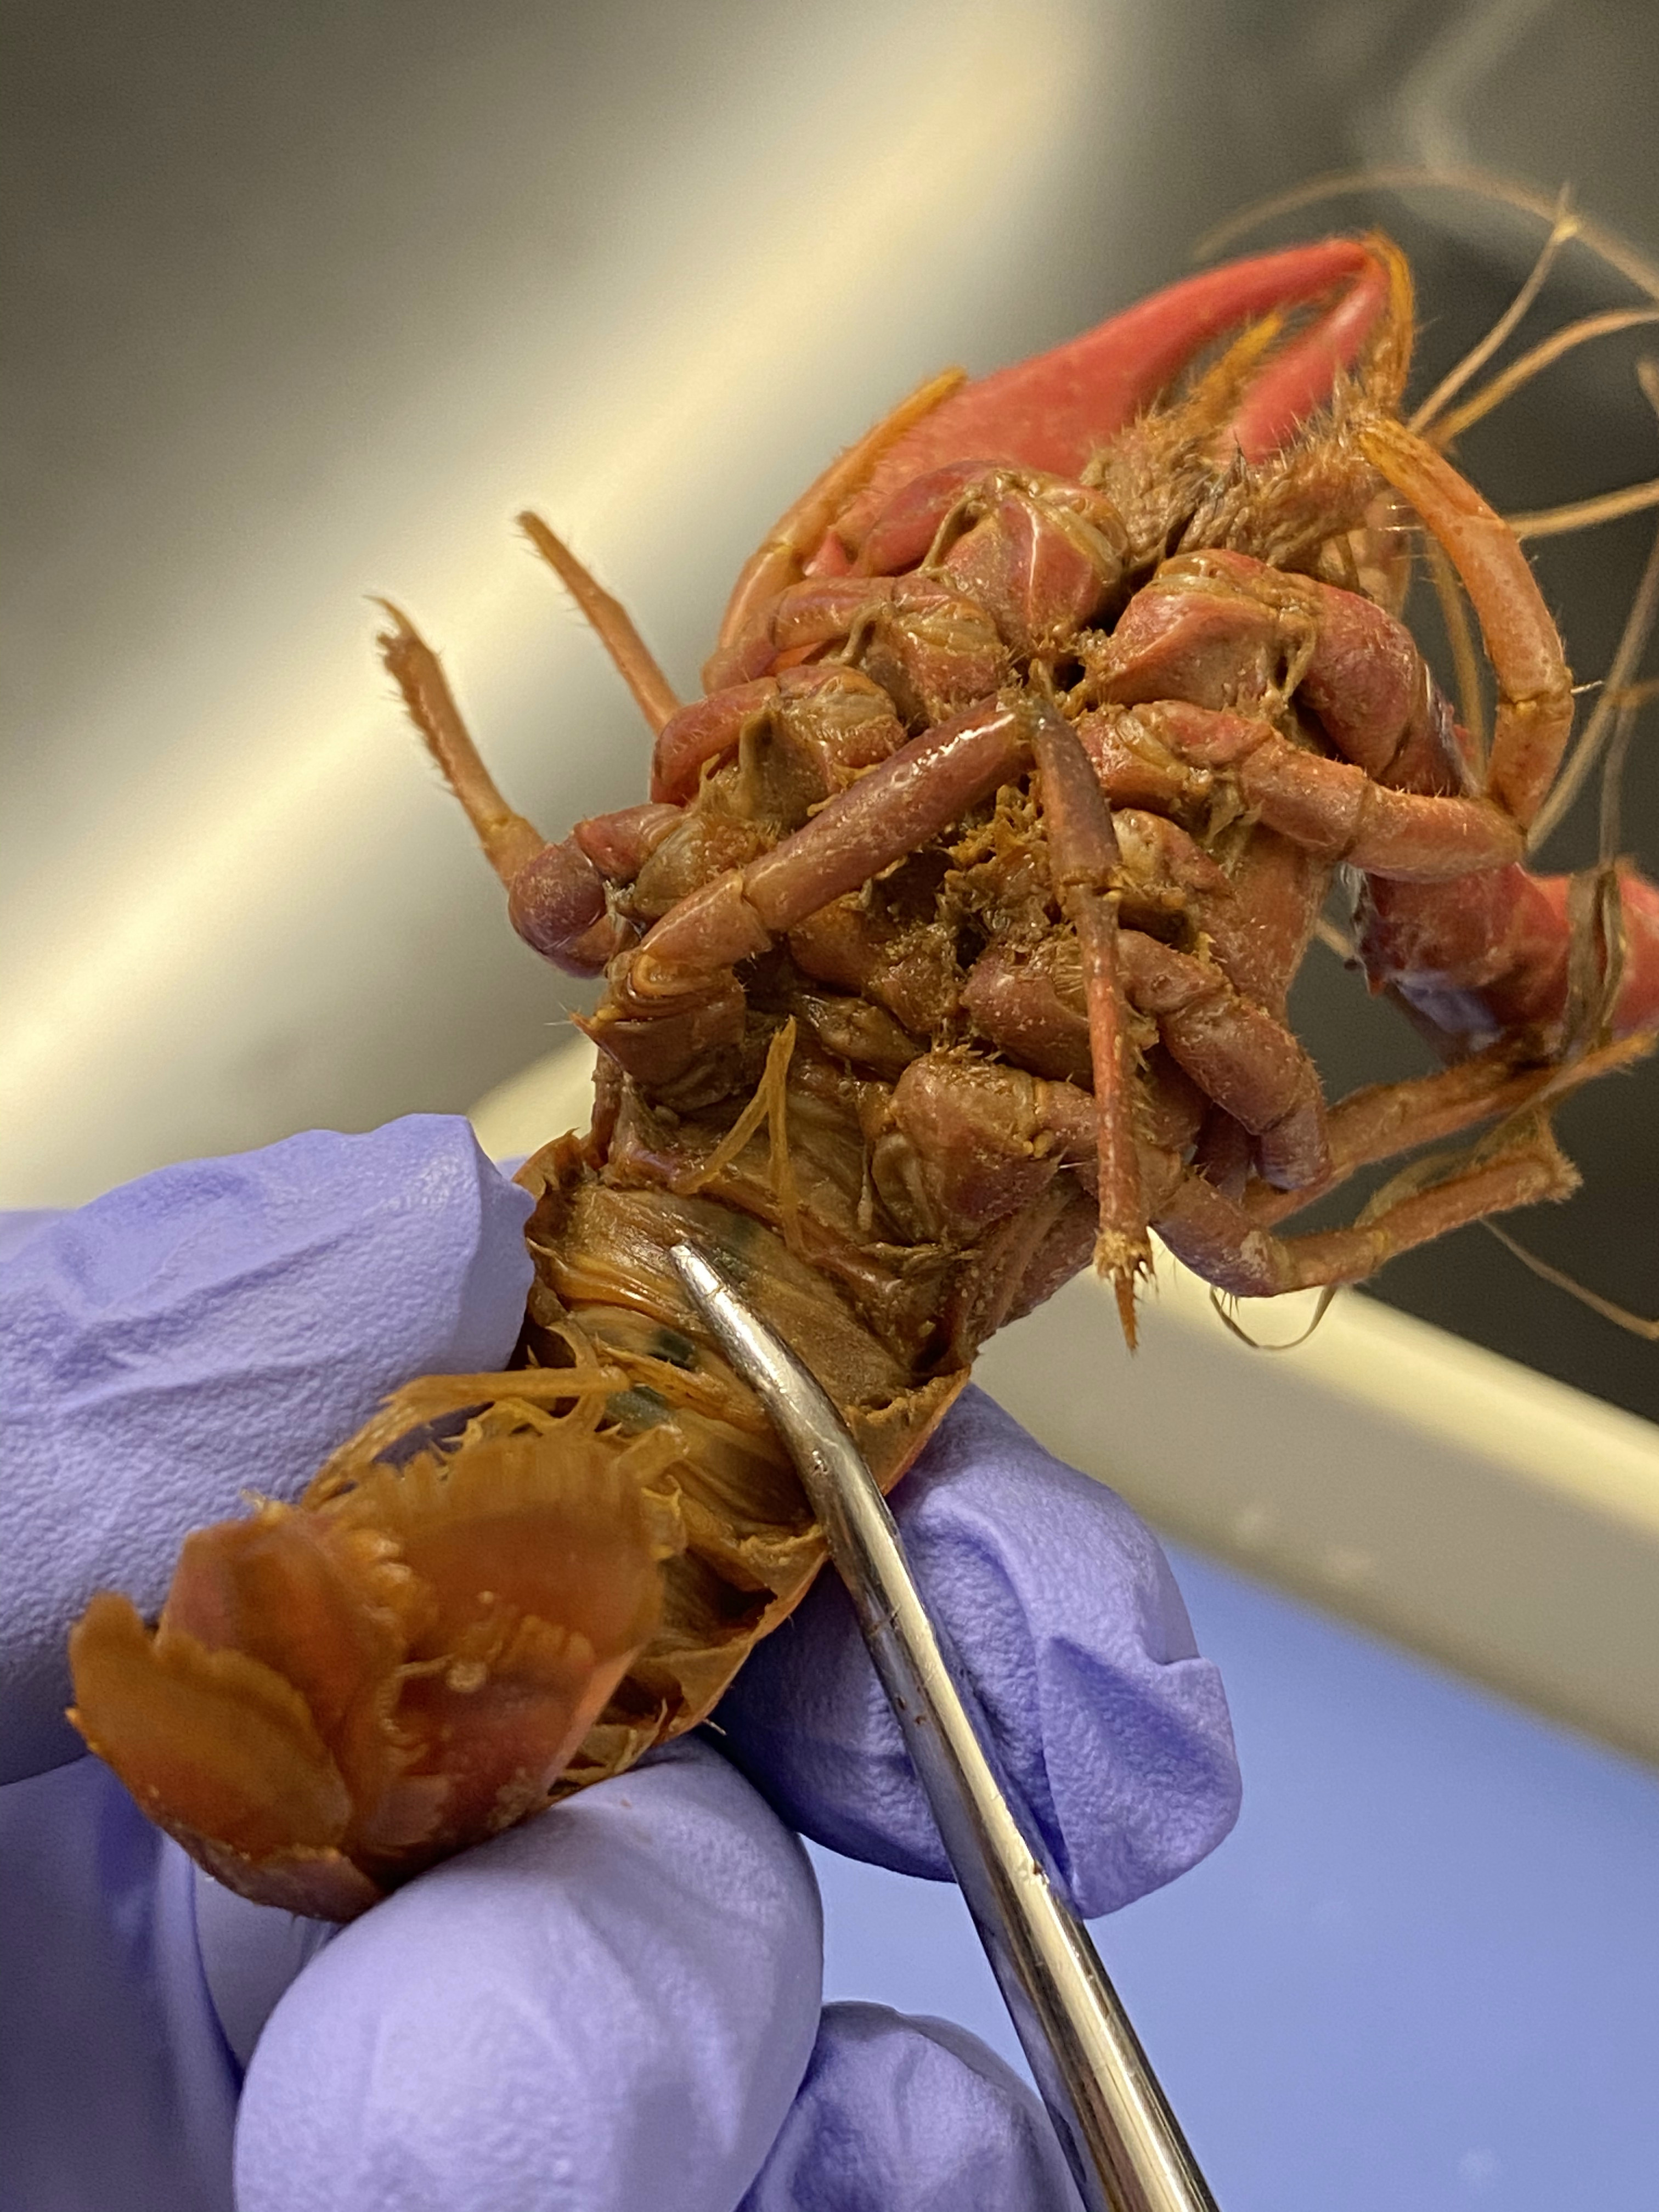 Ventral view of a female crayfish.